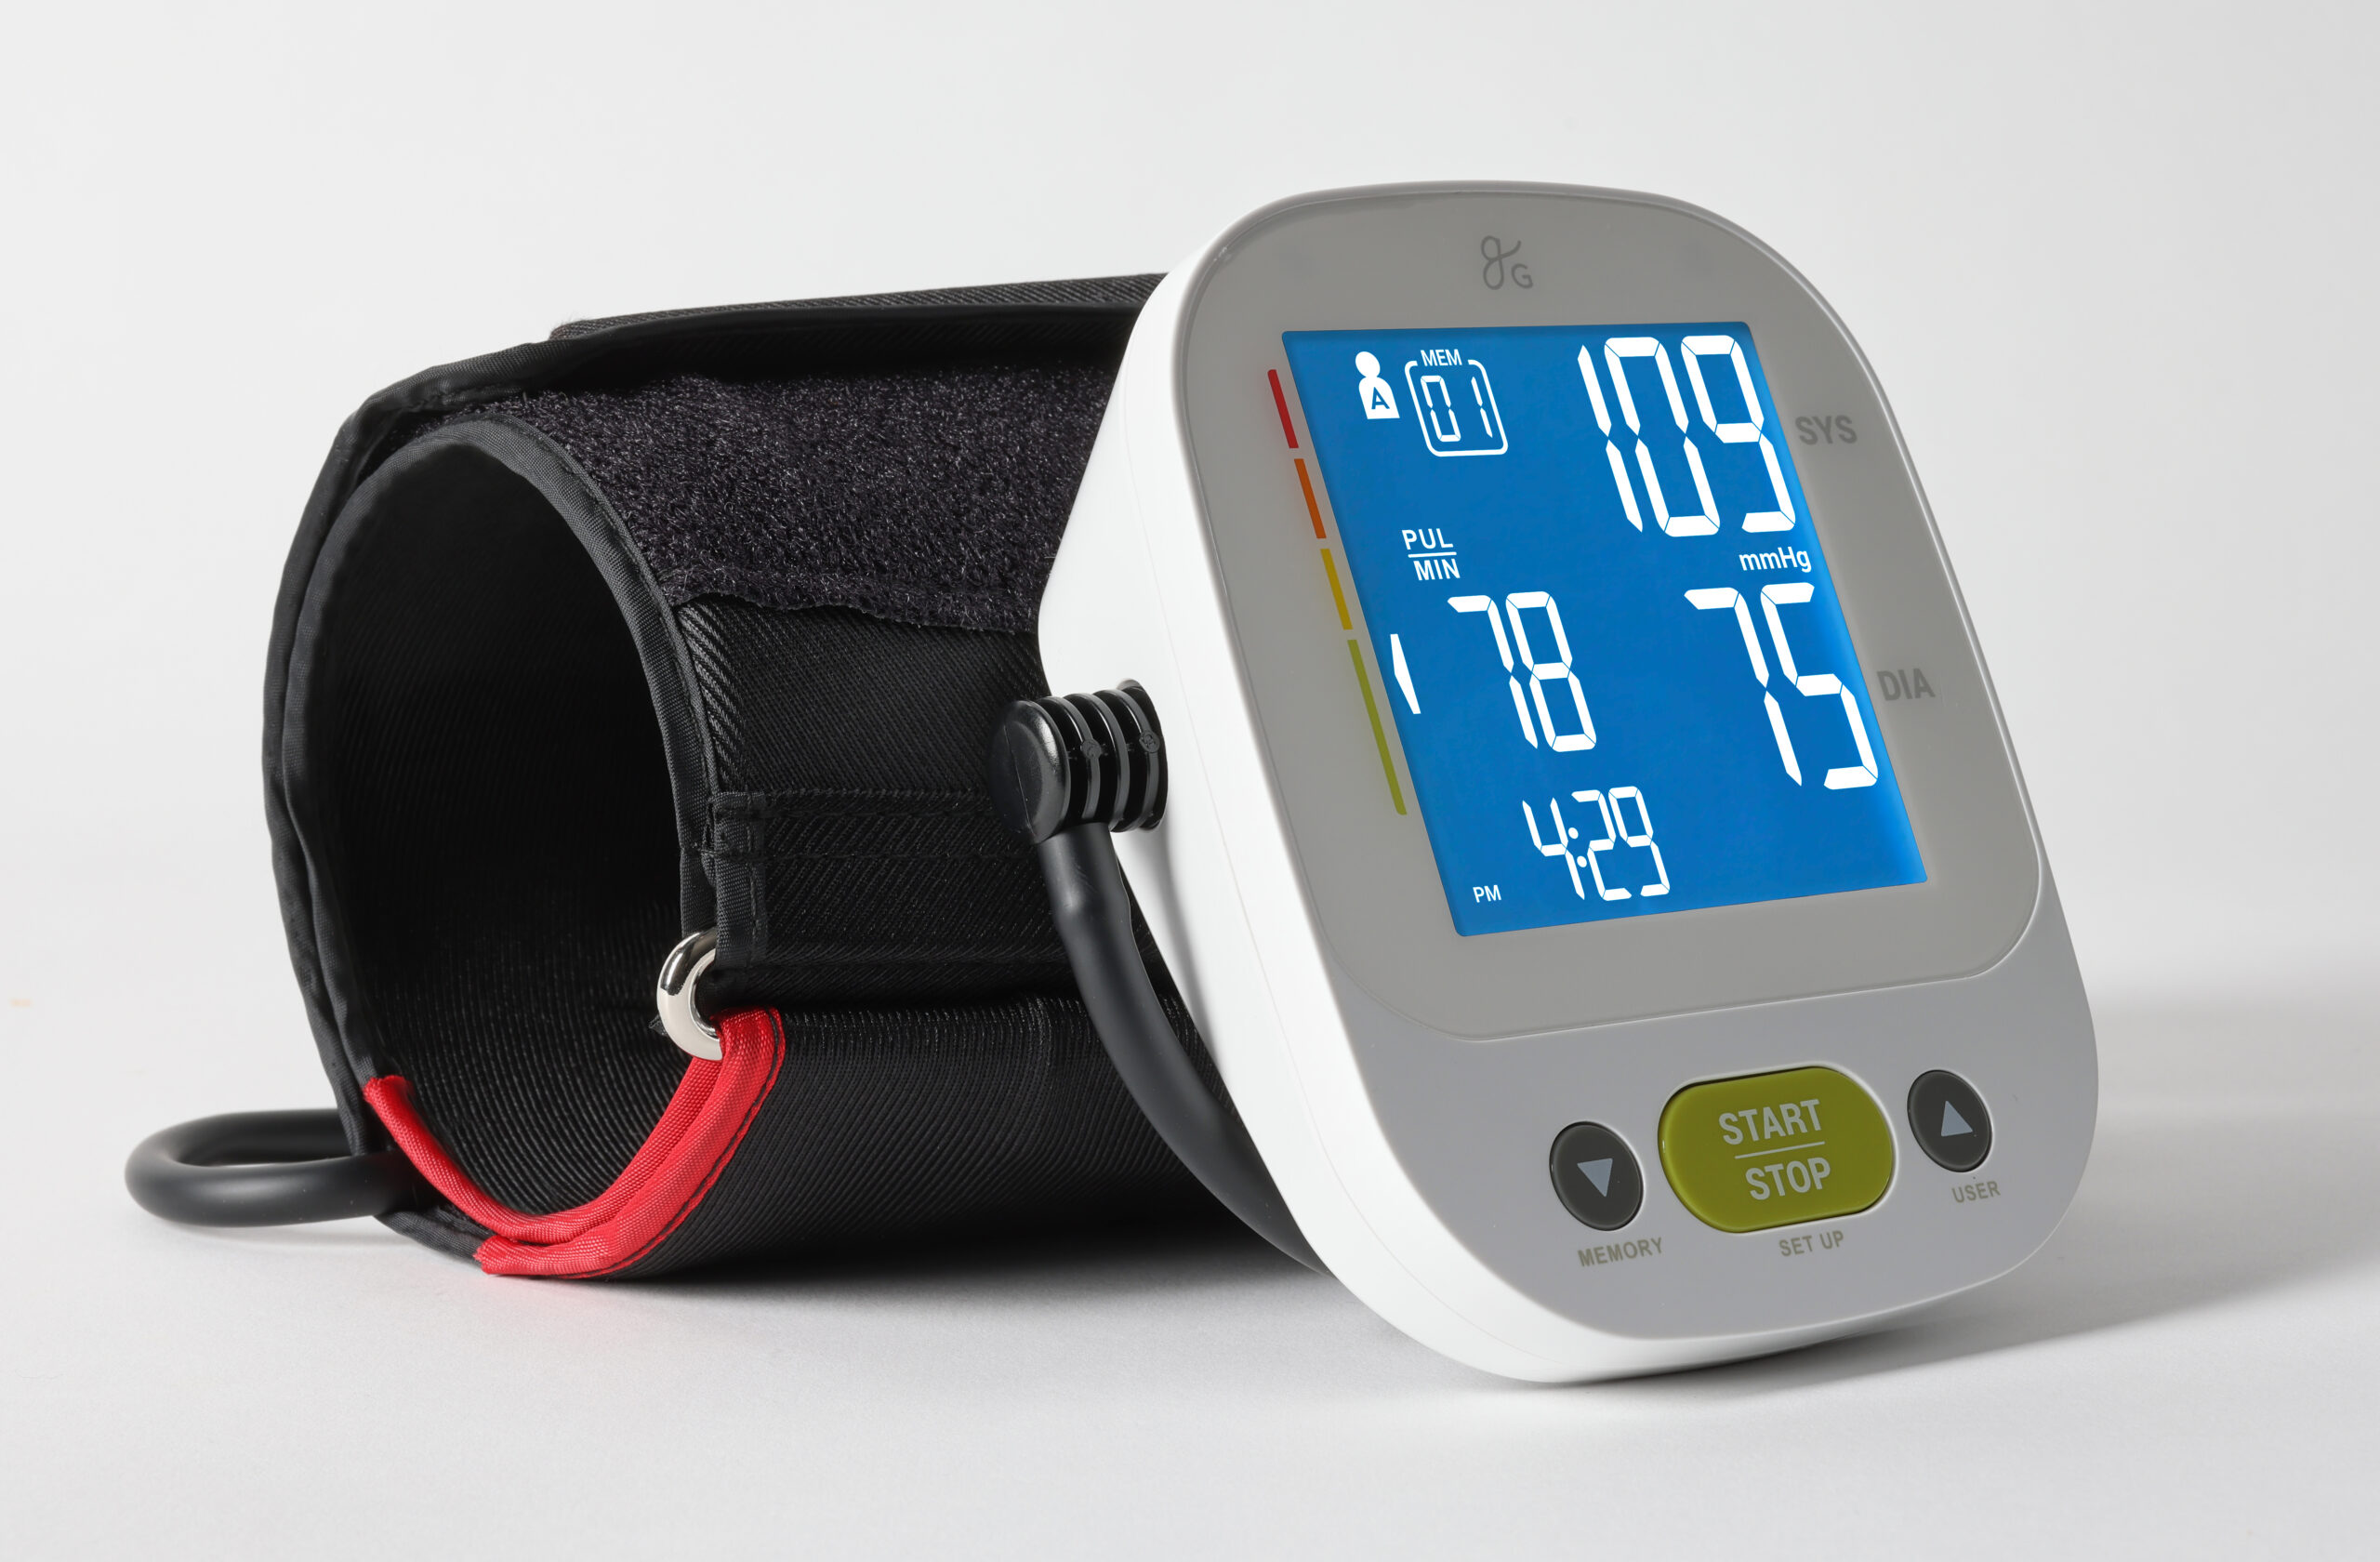 Activity monitor, Activity meter - All medical device manufacturers